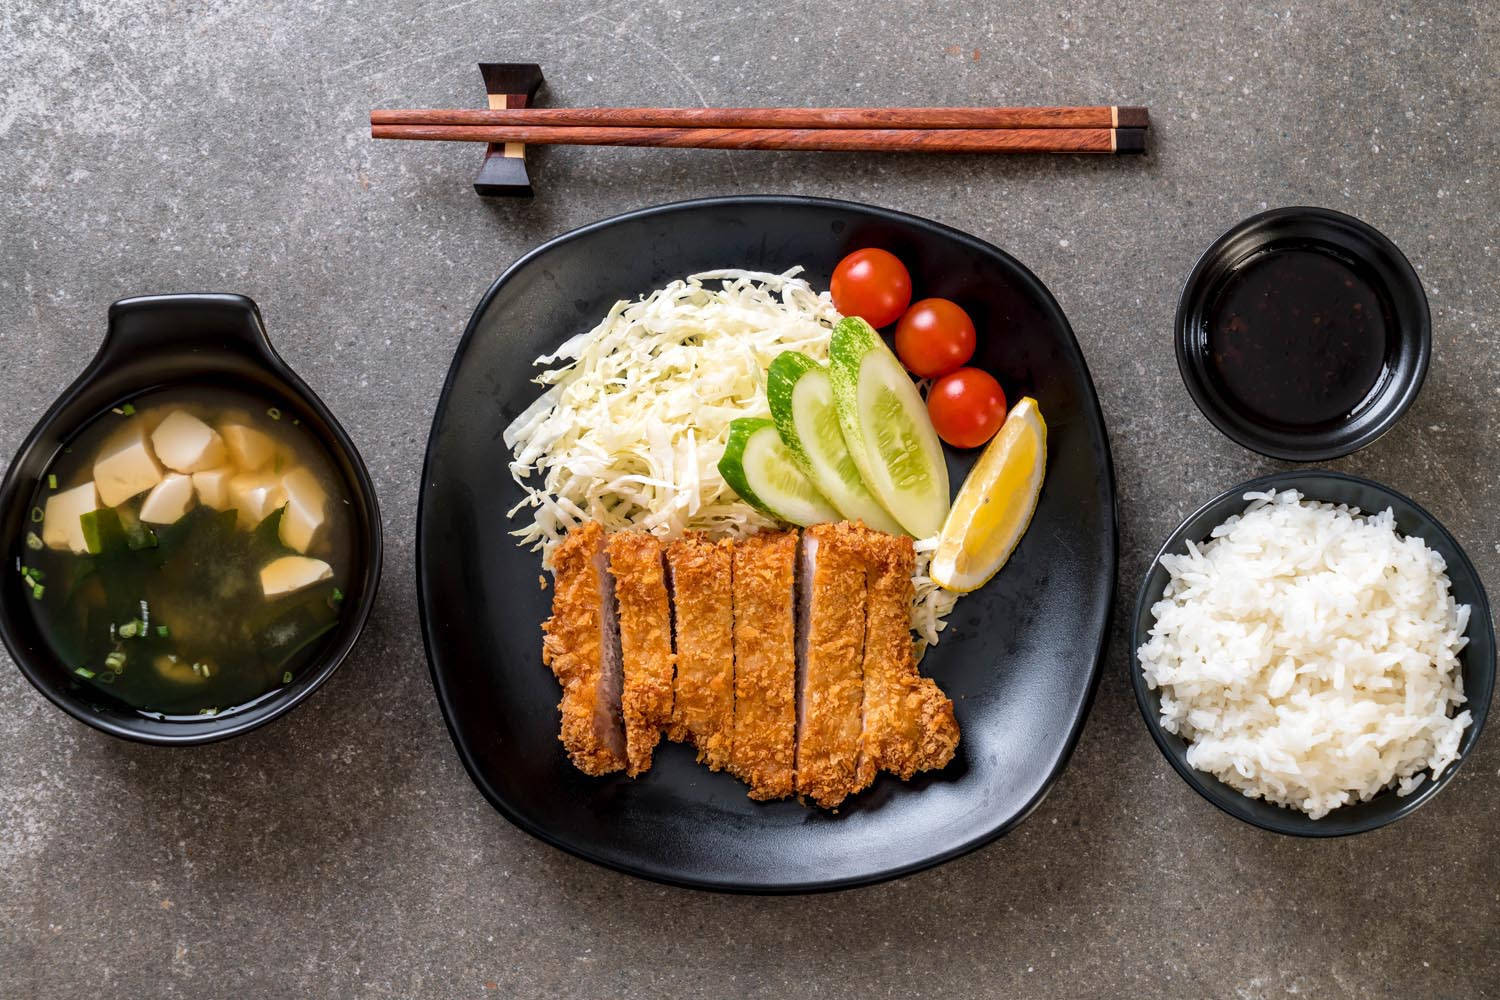 Savory and Authentic Japanese Tonkatsu Meal Wallpaper